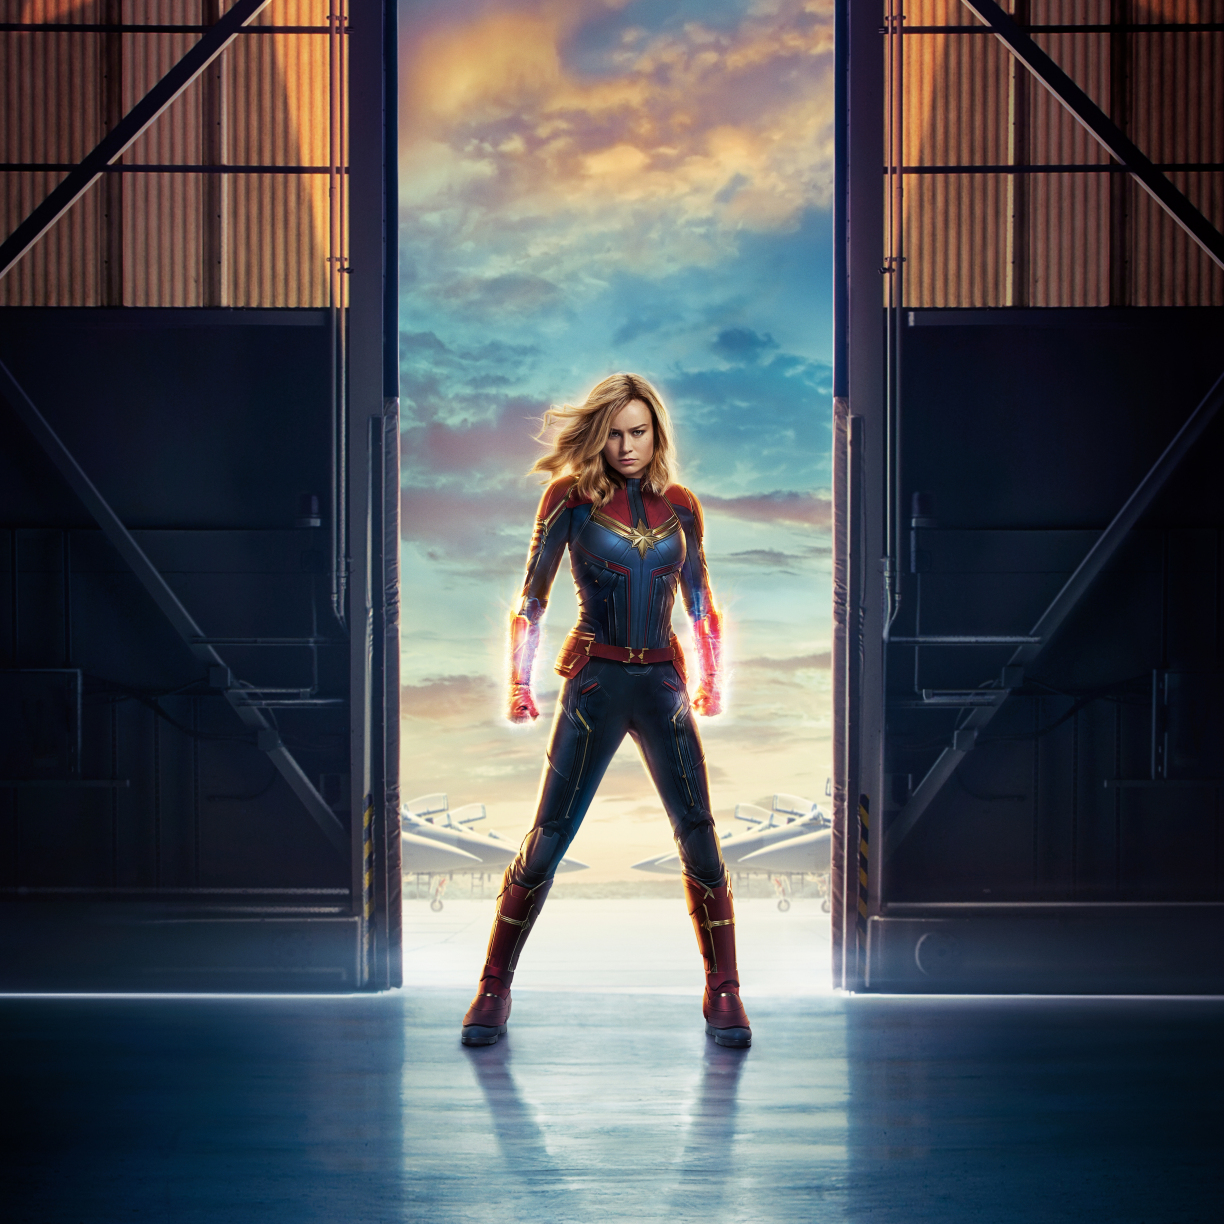 Movie, captain marvel, superhero, poster wallpaper, HD image, picture, background, a6ac4b